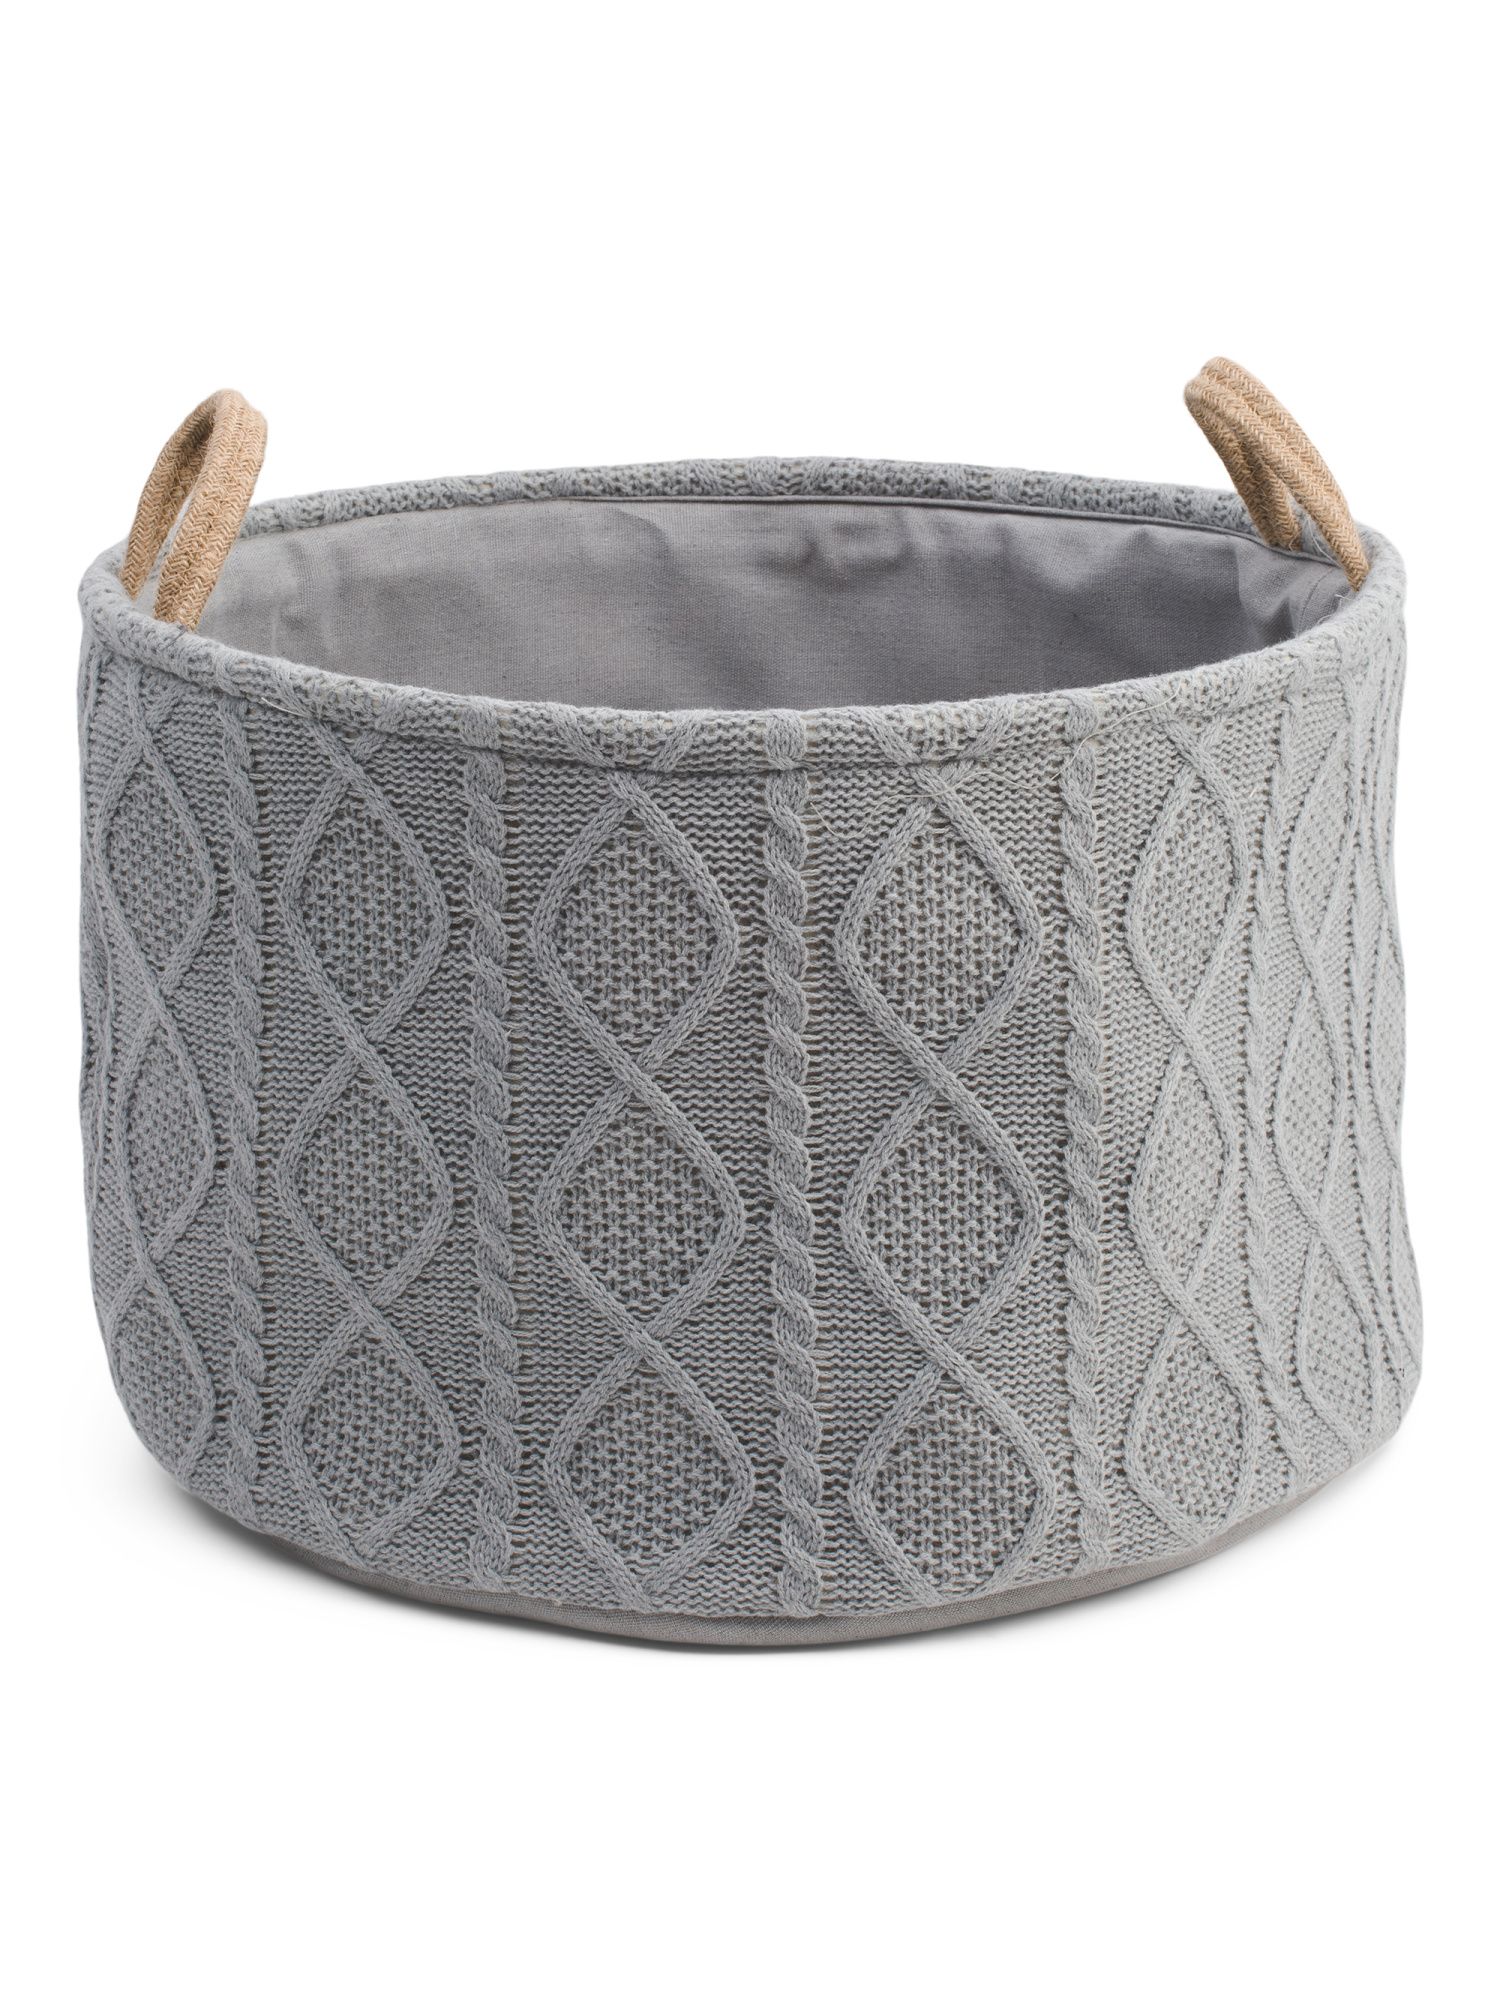 Large Cable And Diamond Knit Round Tote | TJ Maxx